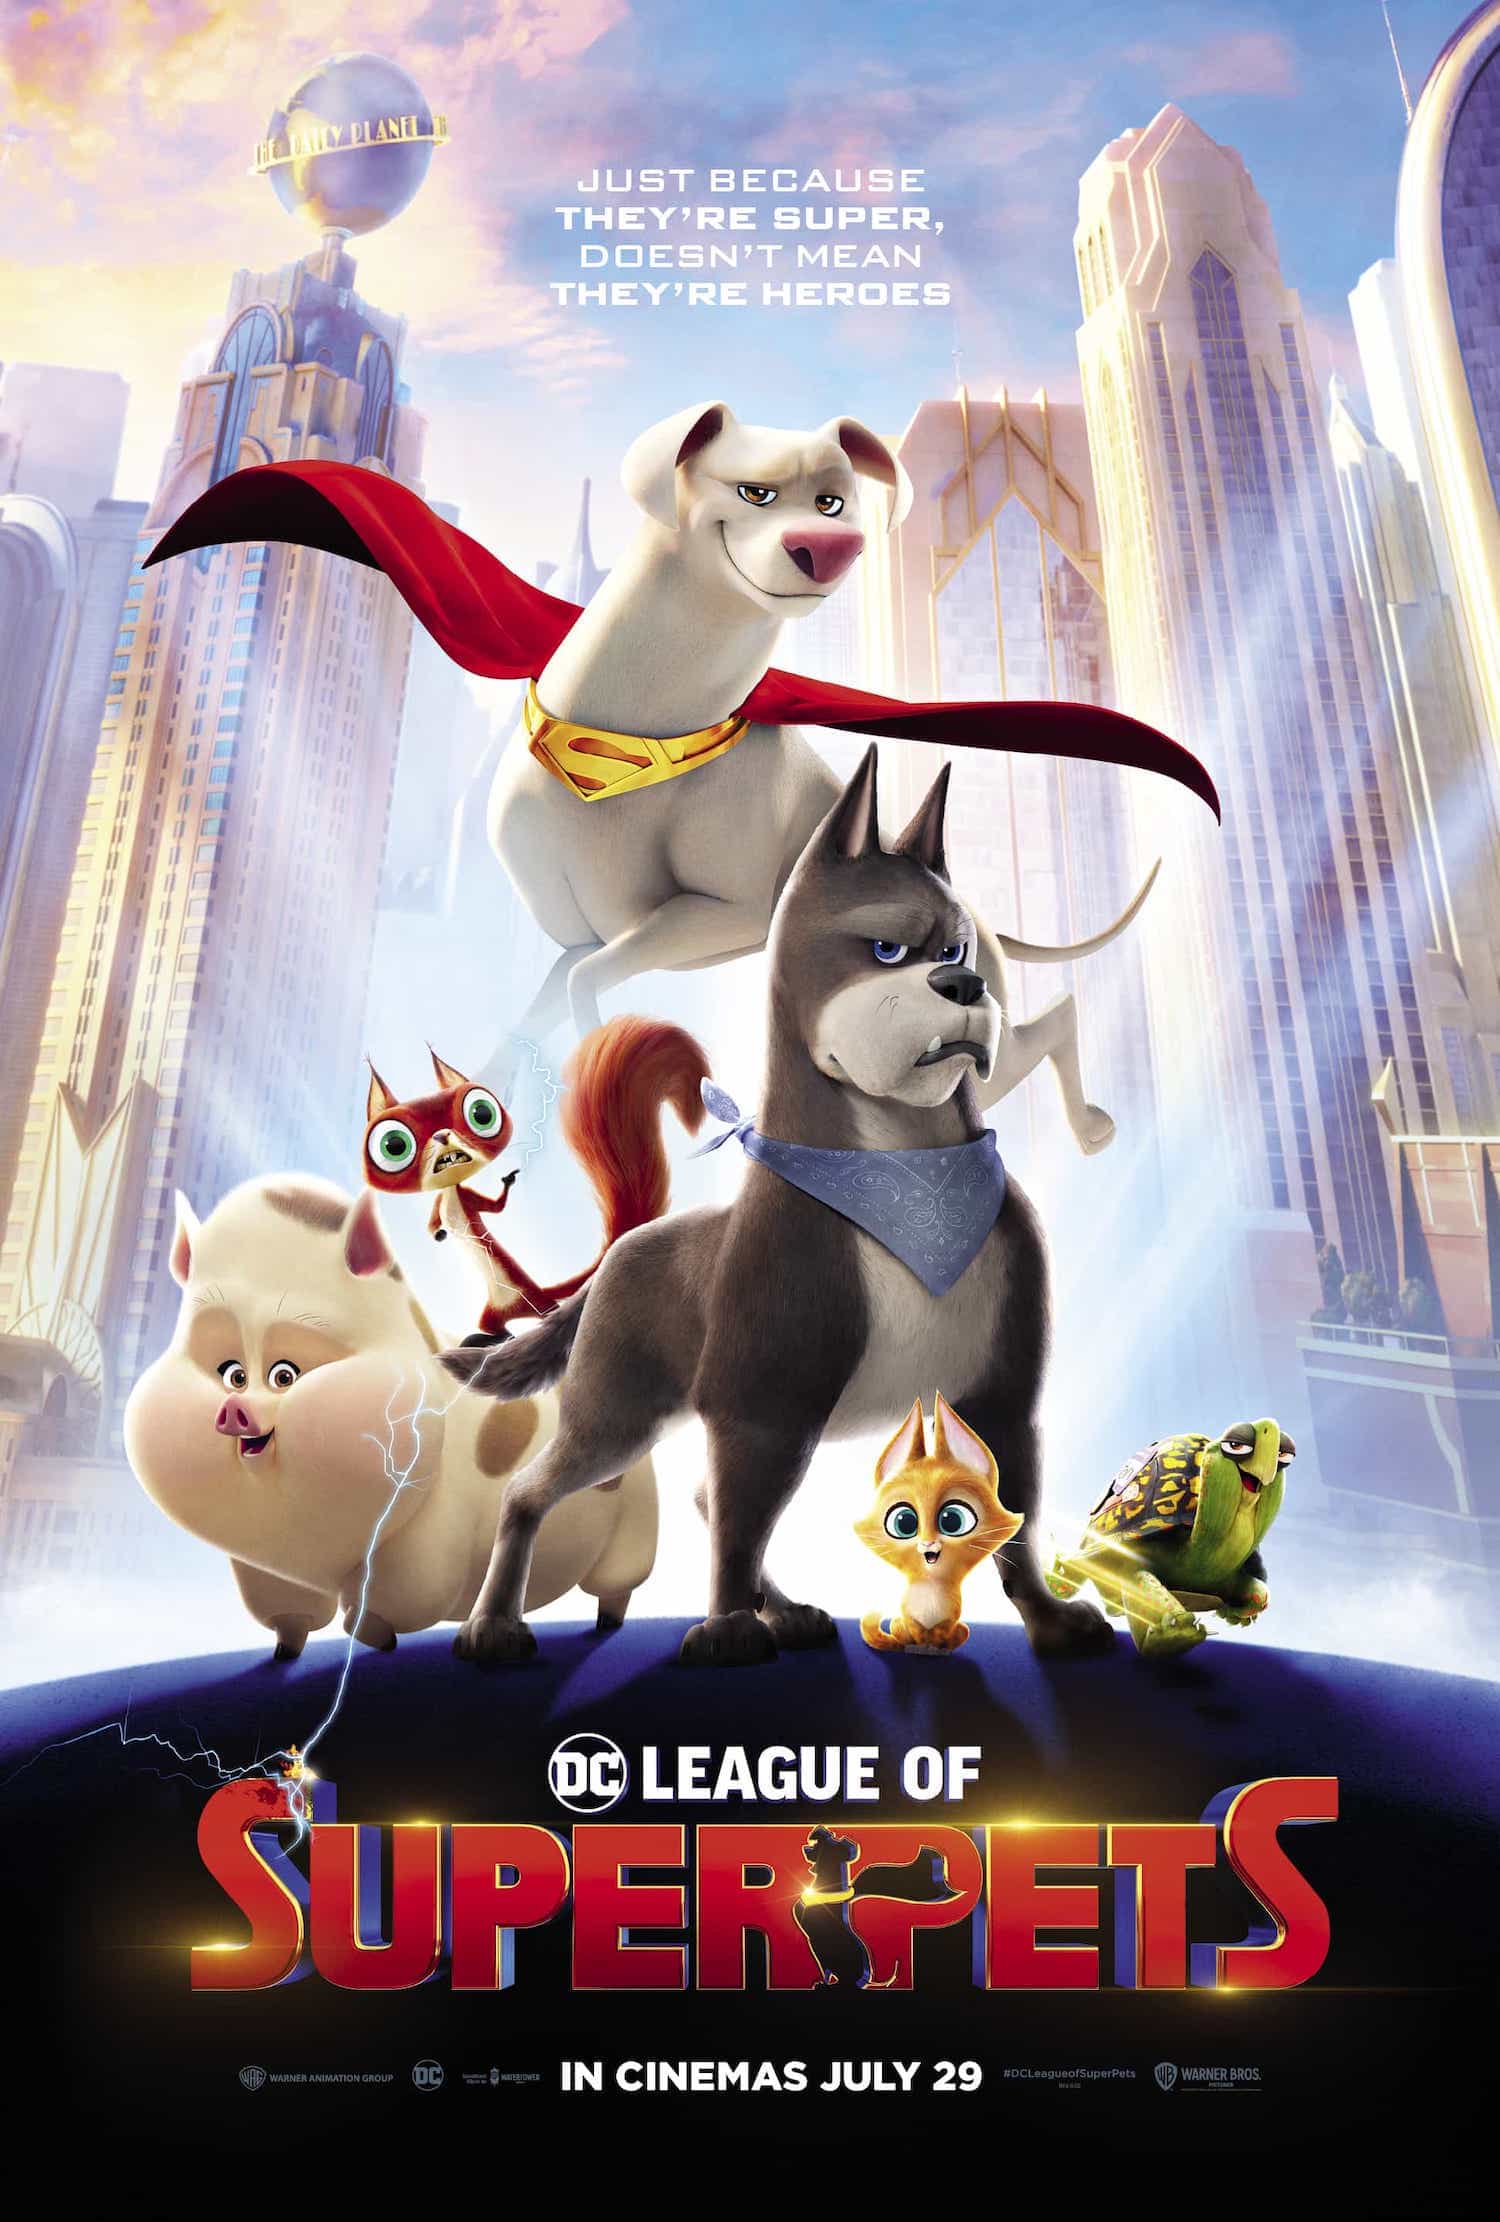 US Box Office Weekend Report 29th - 31st July 2022: DC League of Super-Pets makes its debut at he top of the North American box office with $23 Million